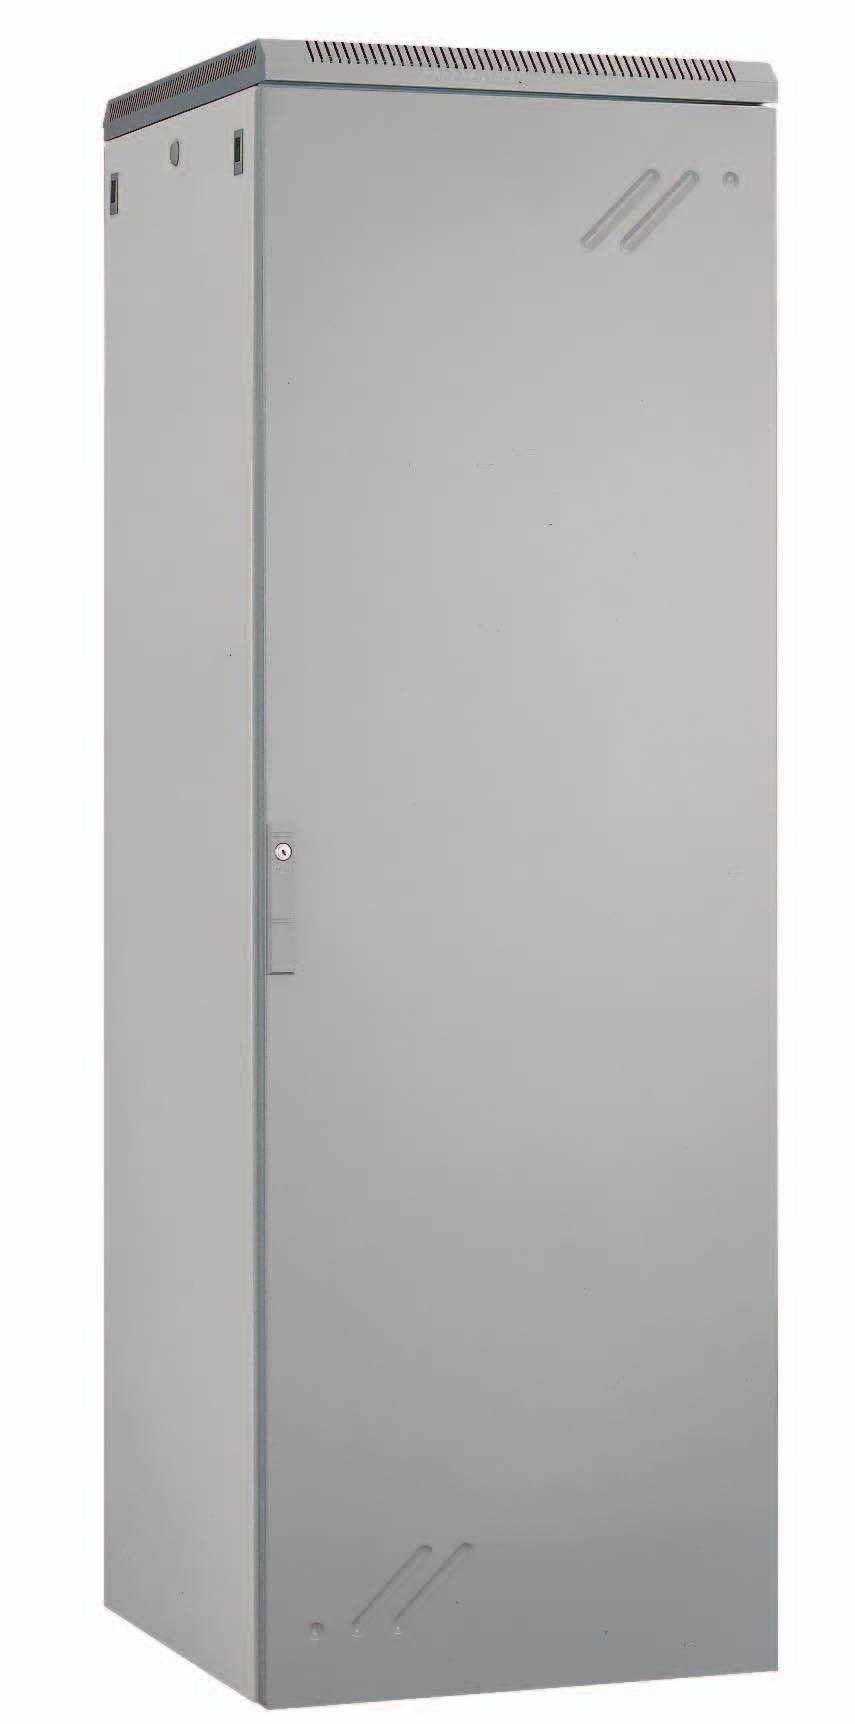 10 IMRAK Doors Plain steel & glass doors Doors suitable for the front or rear of IMRAK are available in metal and glass.